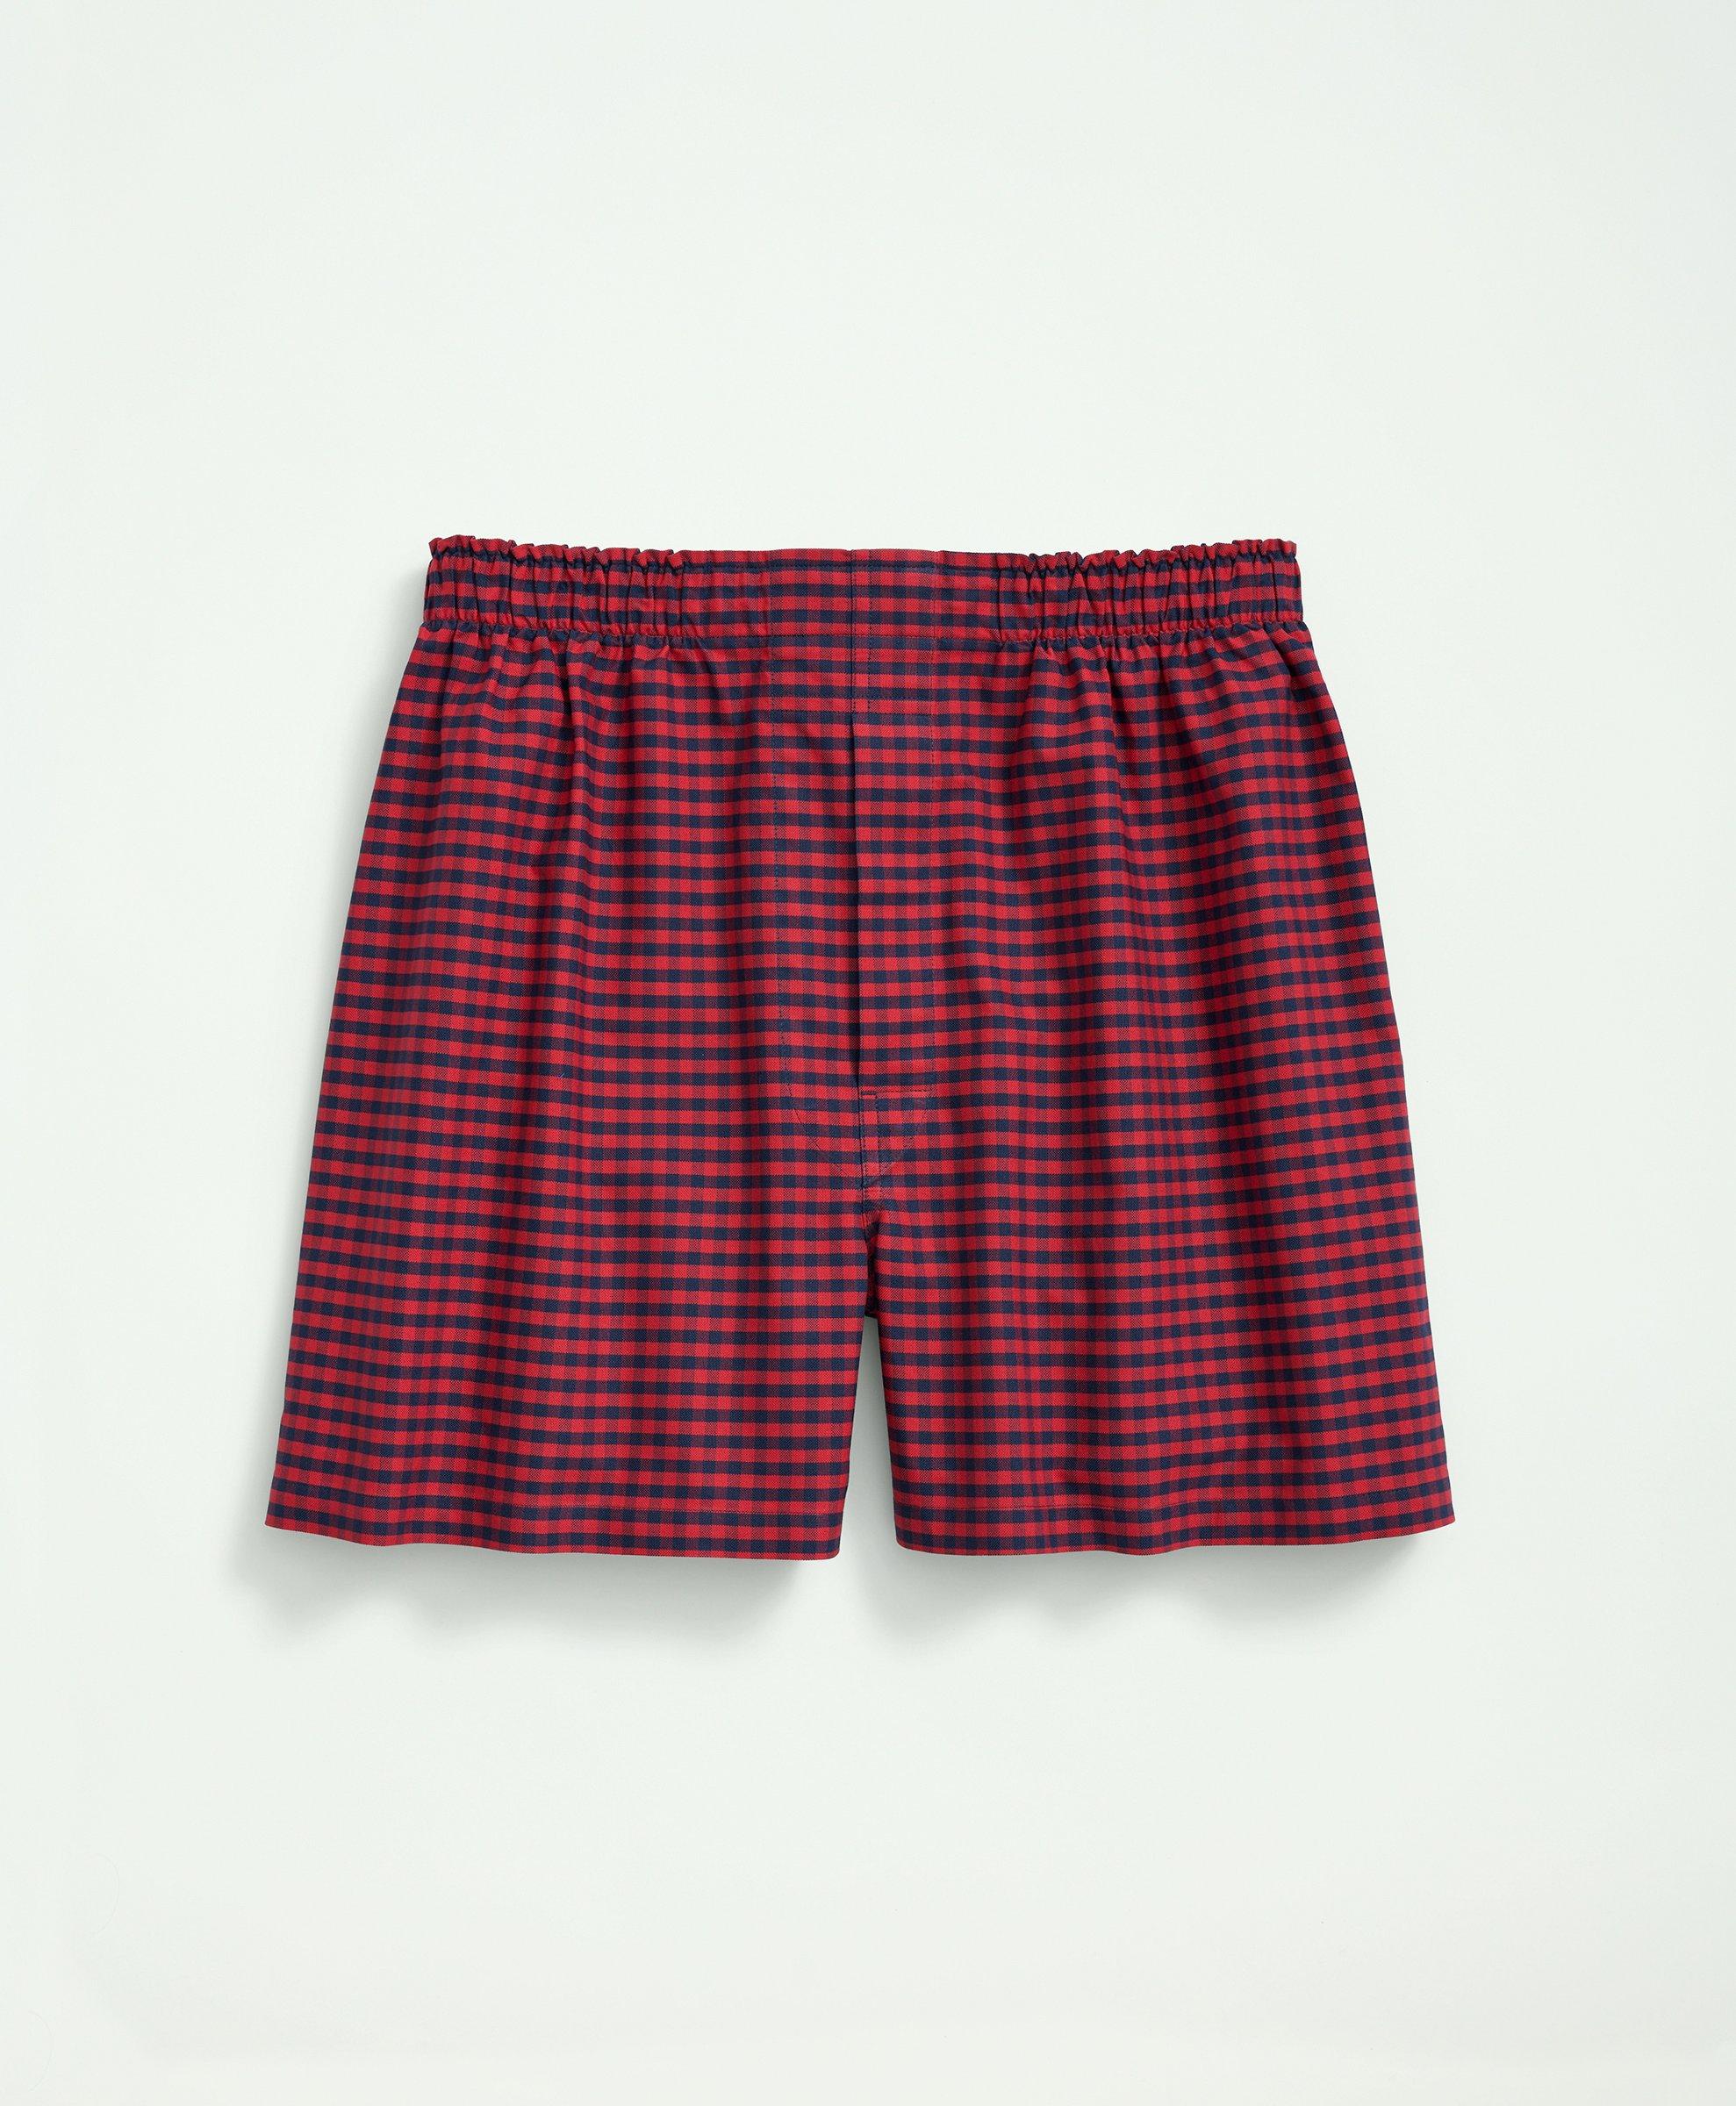 Cotton Oxford Gingham Boxers, image 1